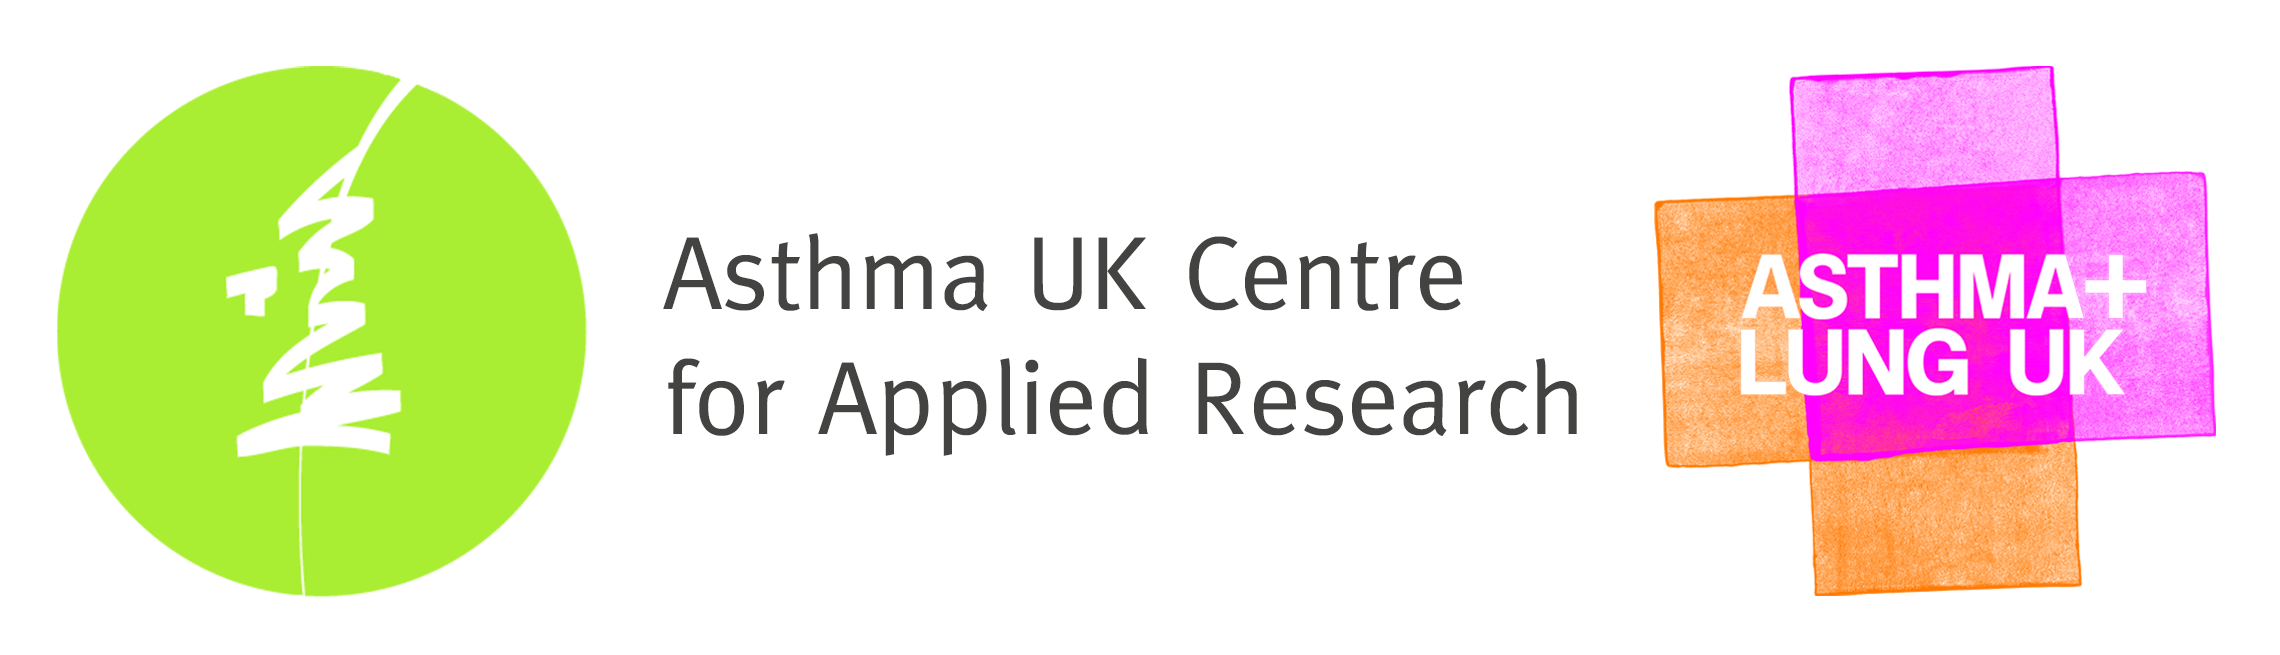 Asthma UK Centre for Applied Research logo